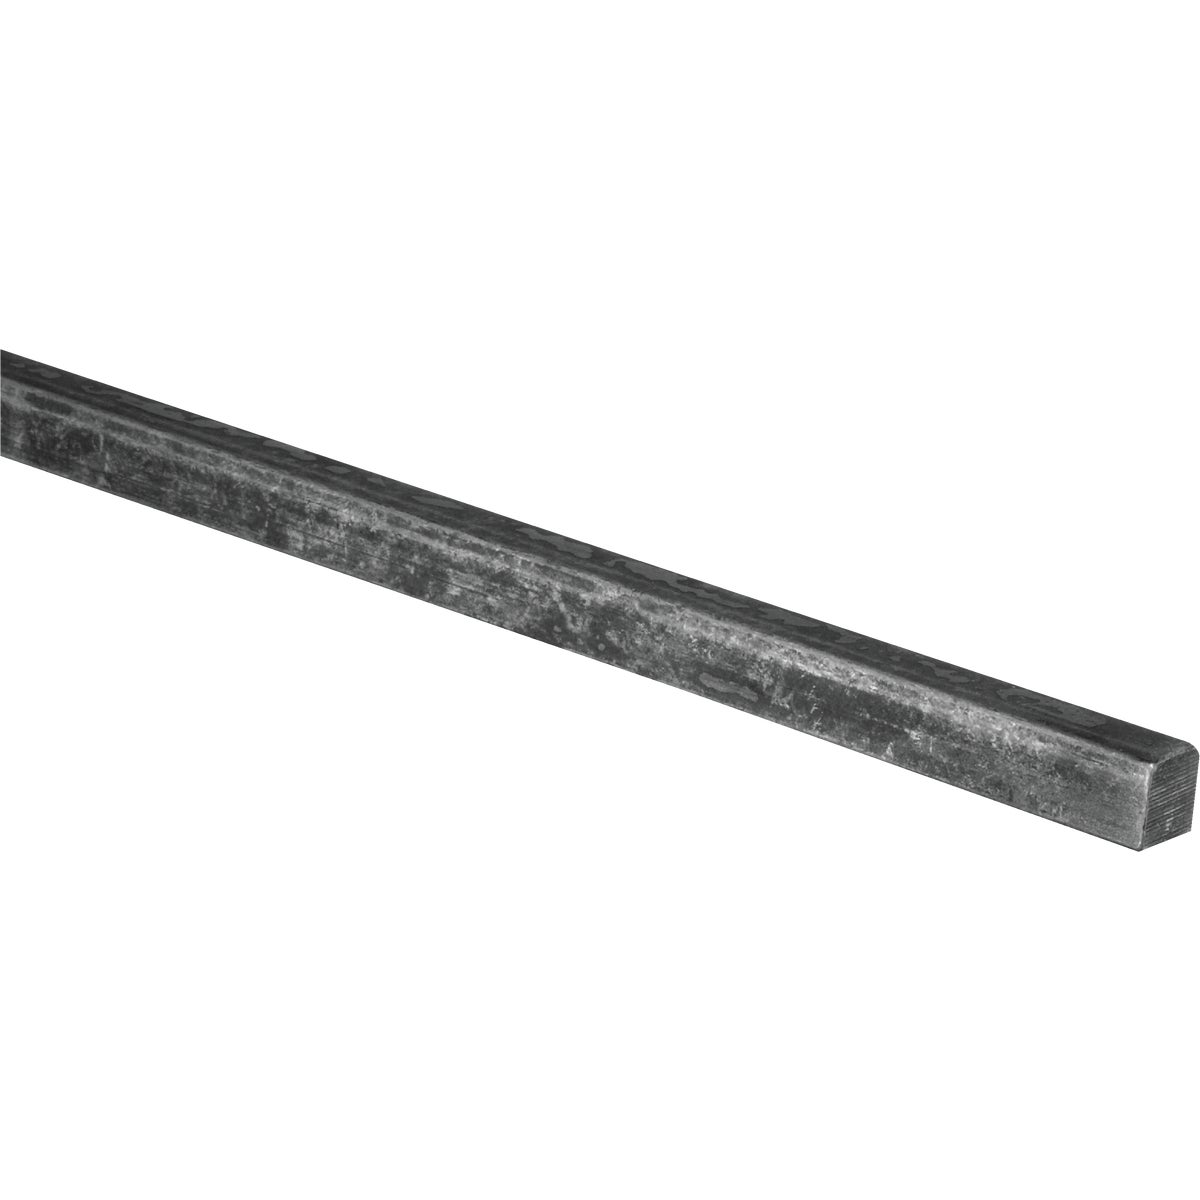 Item 767330, Weldable square tubes are ideal for fence repairs, key stock, handles and 